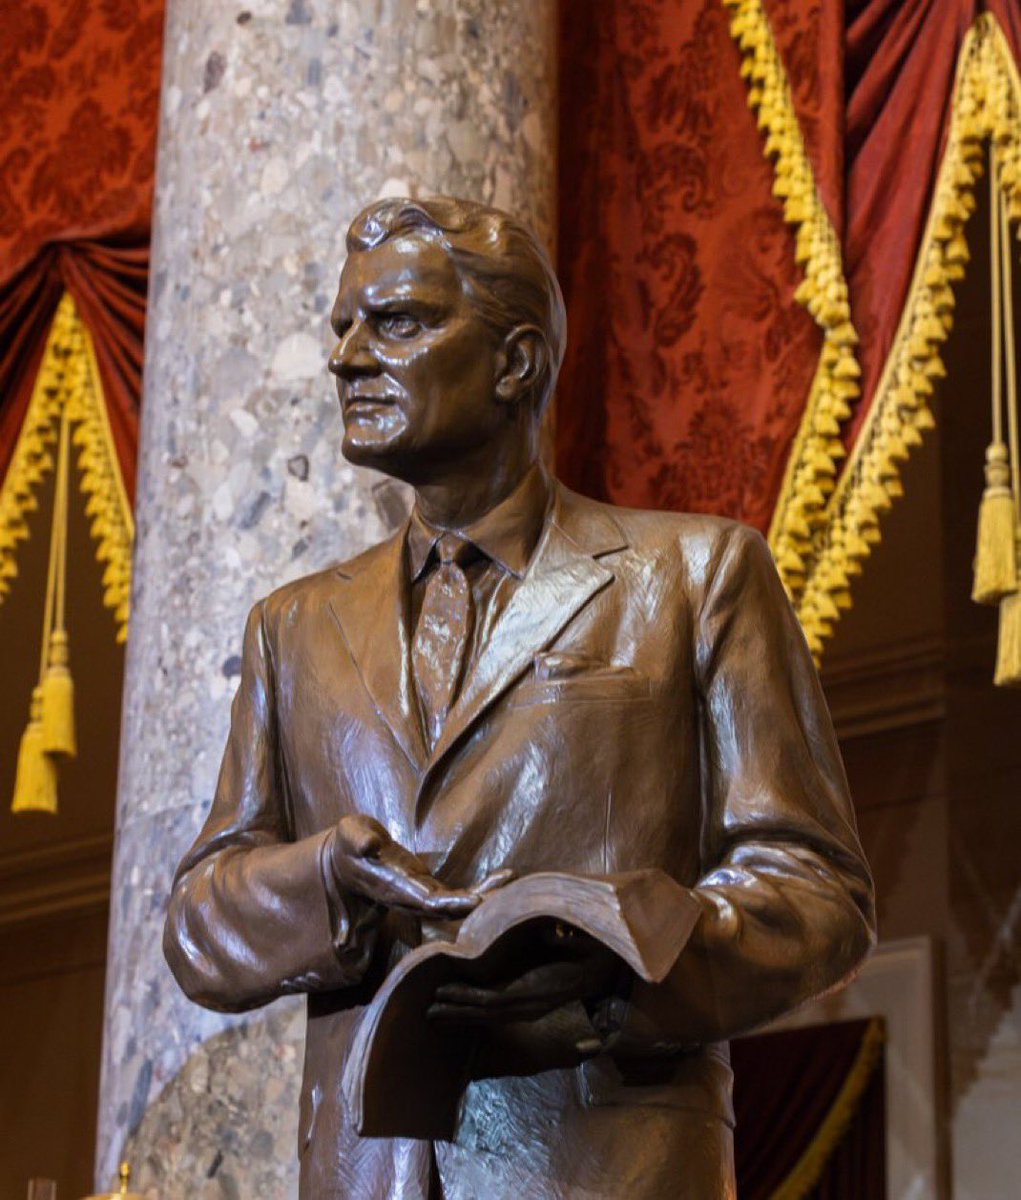 📰 New: A statue of legendary Preacher Billy Graham was unveiled inside the US Capitol.